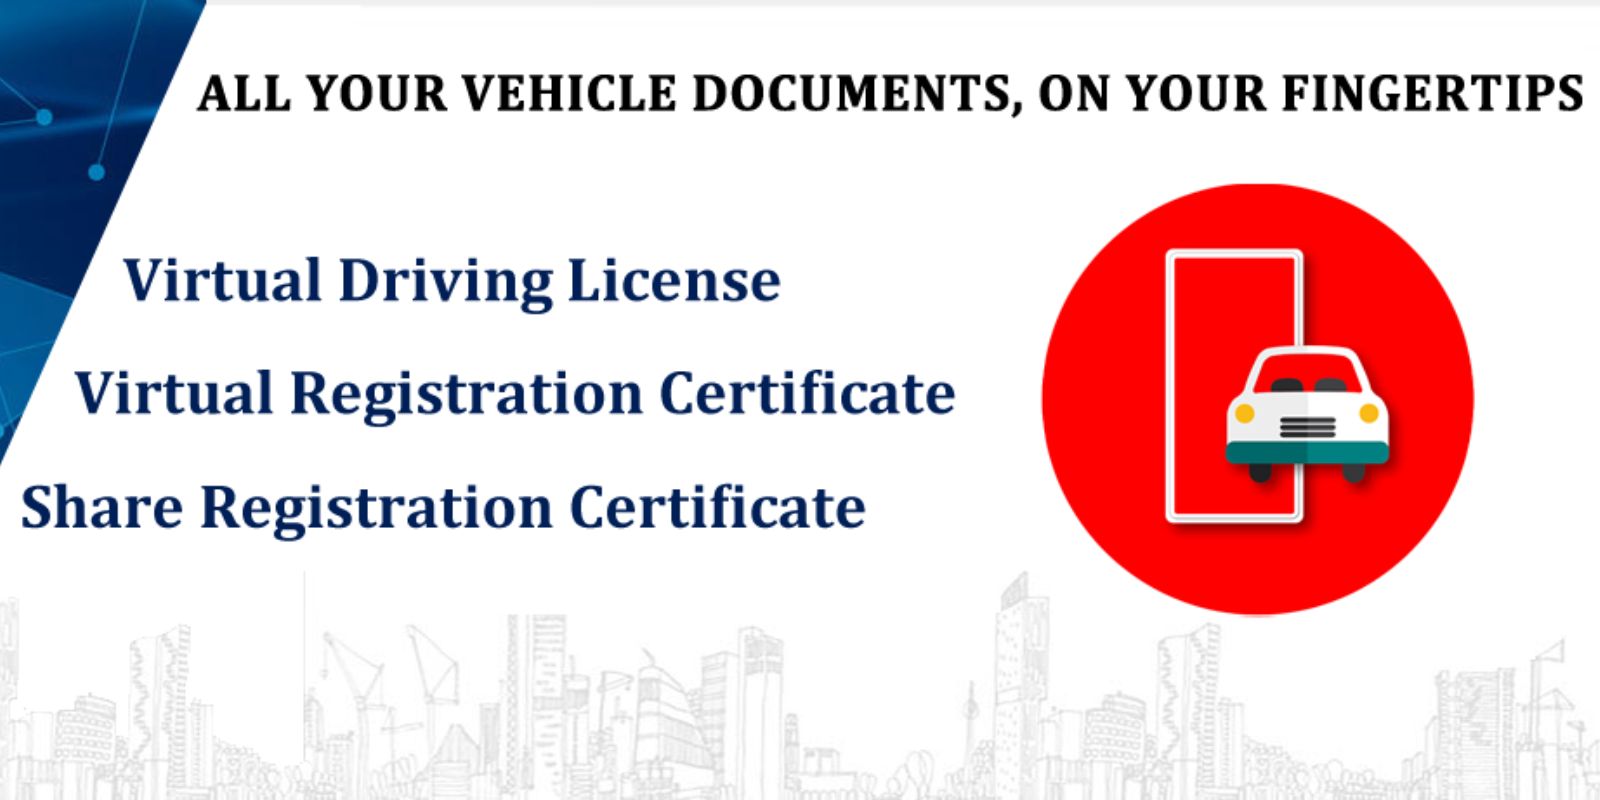 Online Driving Licence Apply